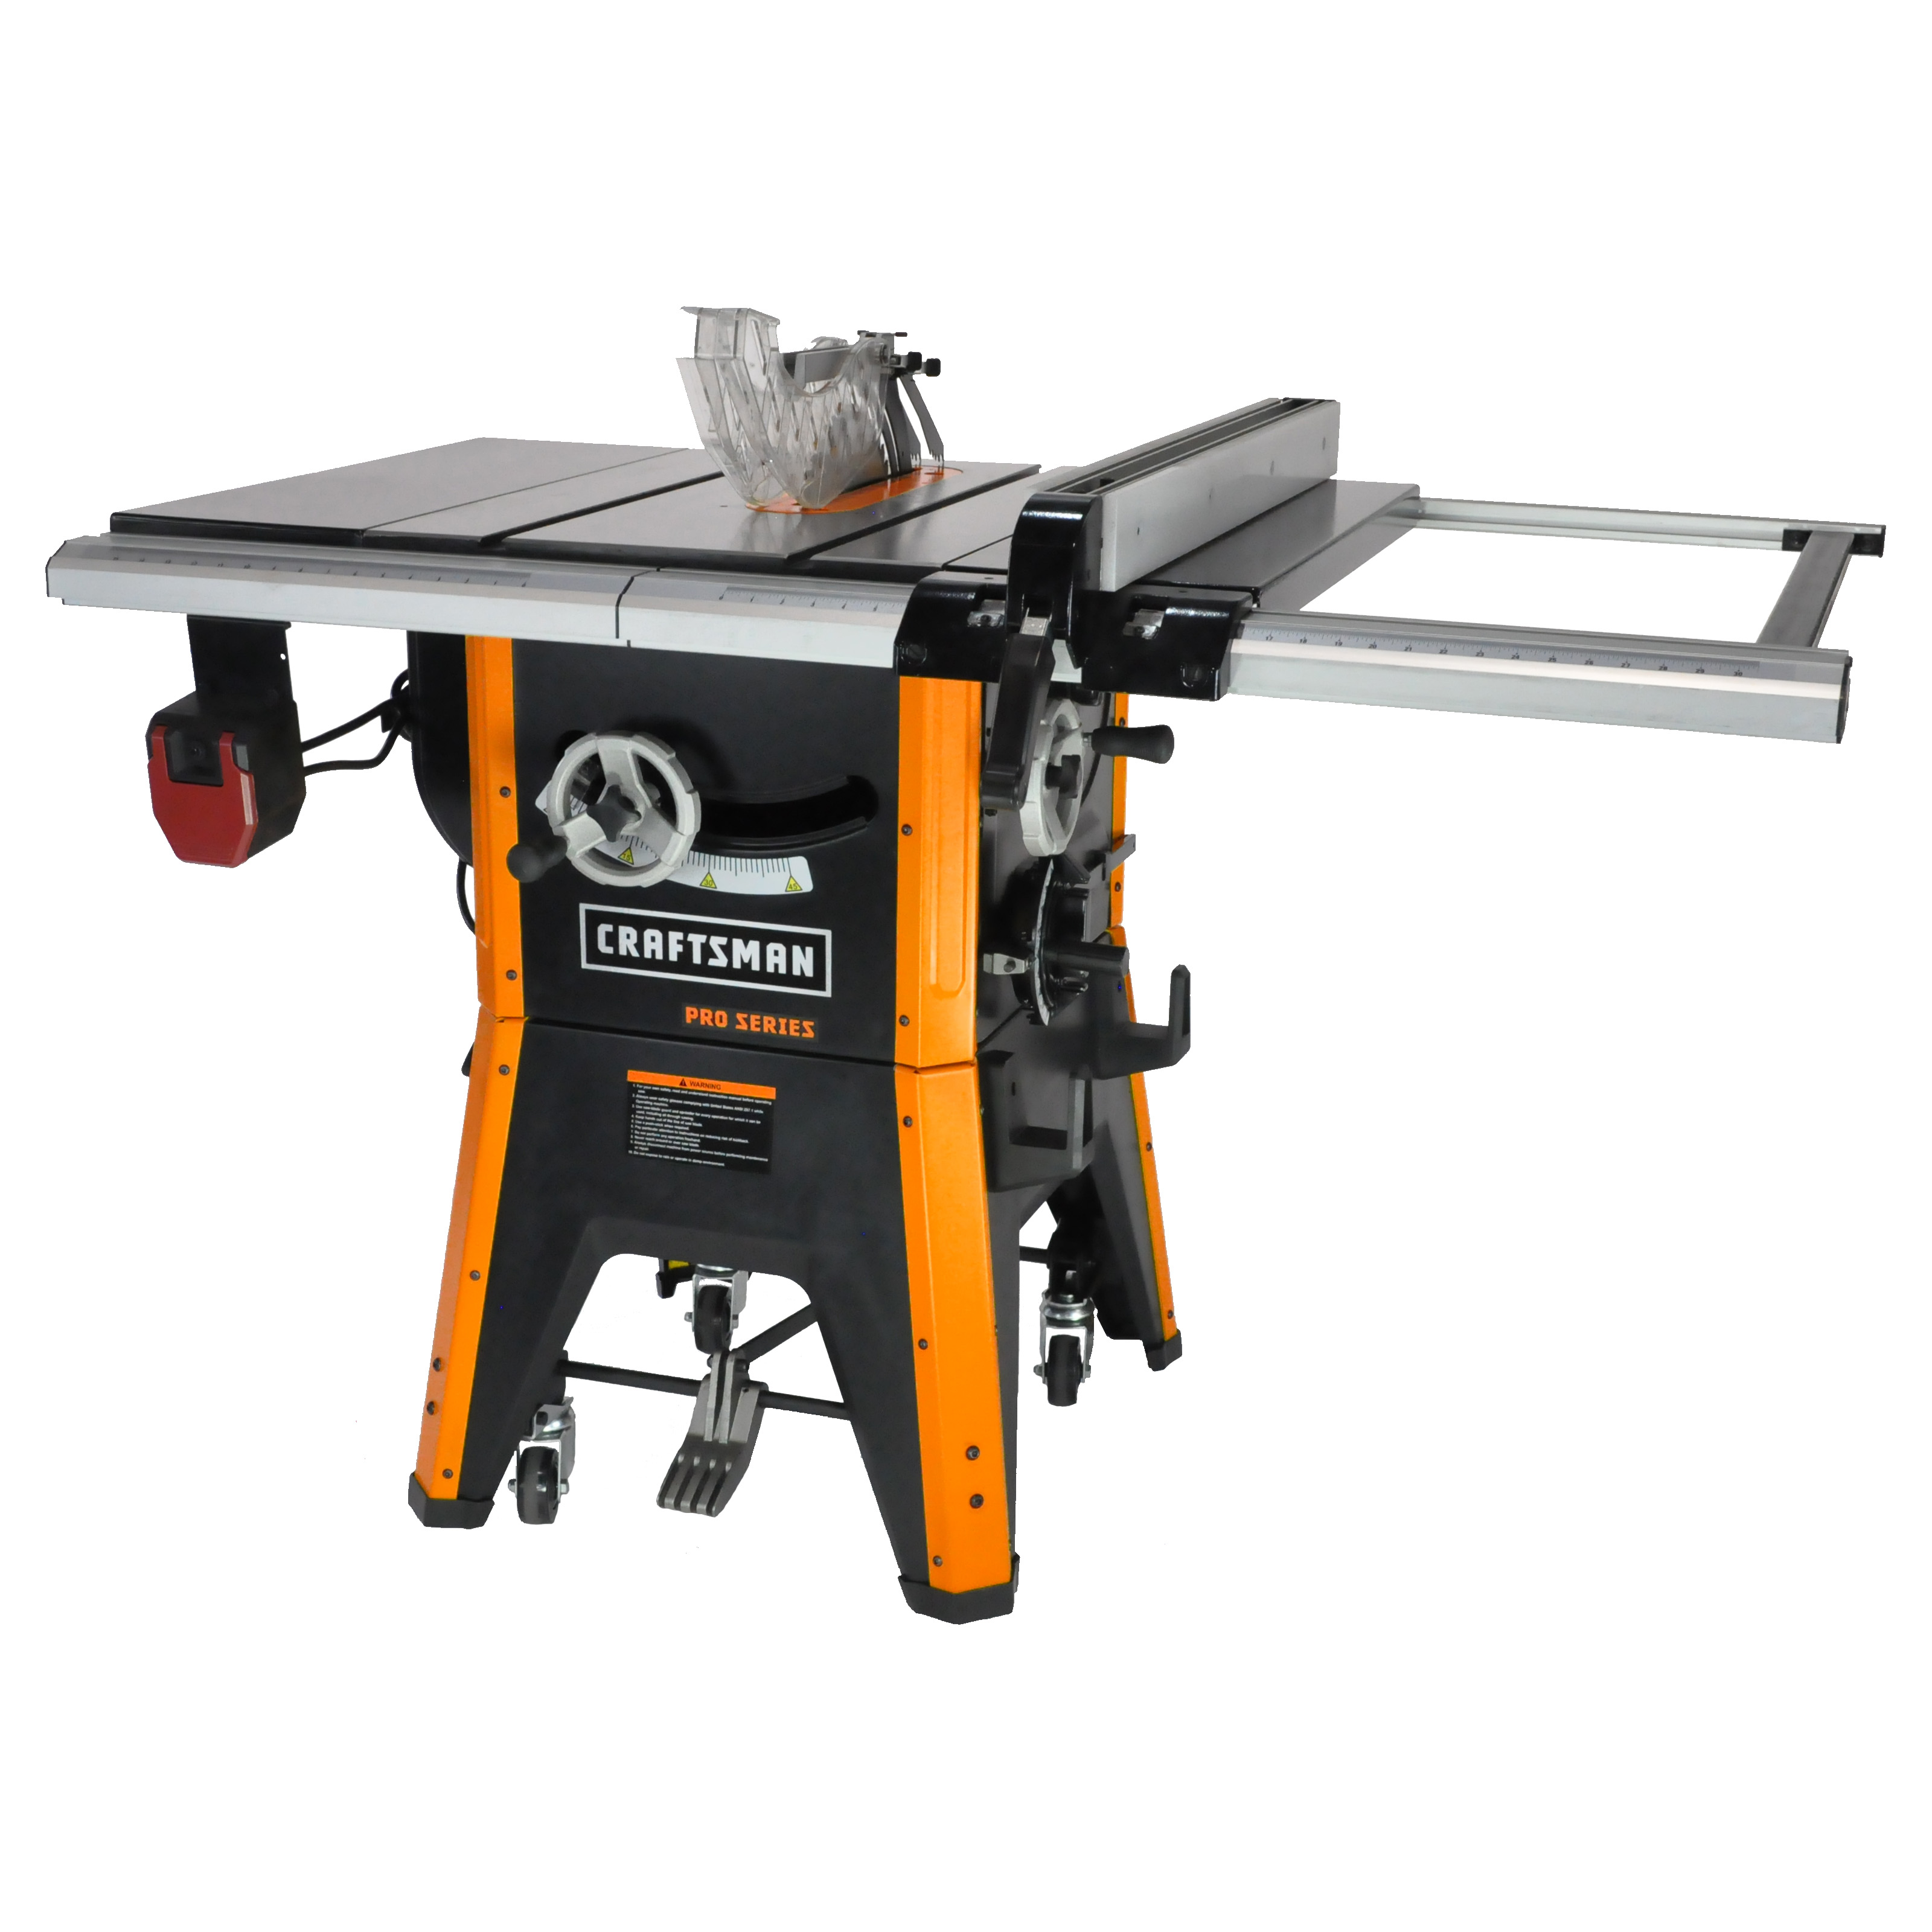 Craftsman ProSeries 10" CONTRACTOR TABLE SAW | Shop Your Way: Online